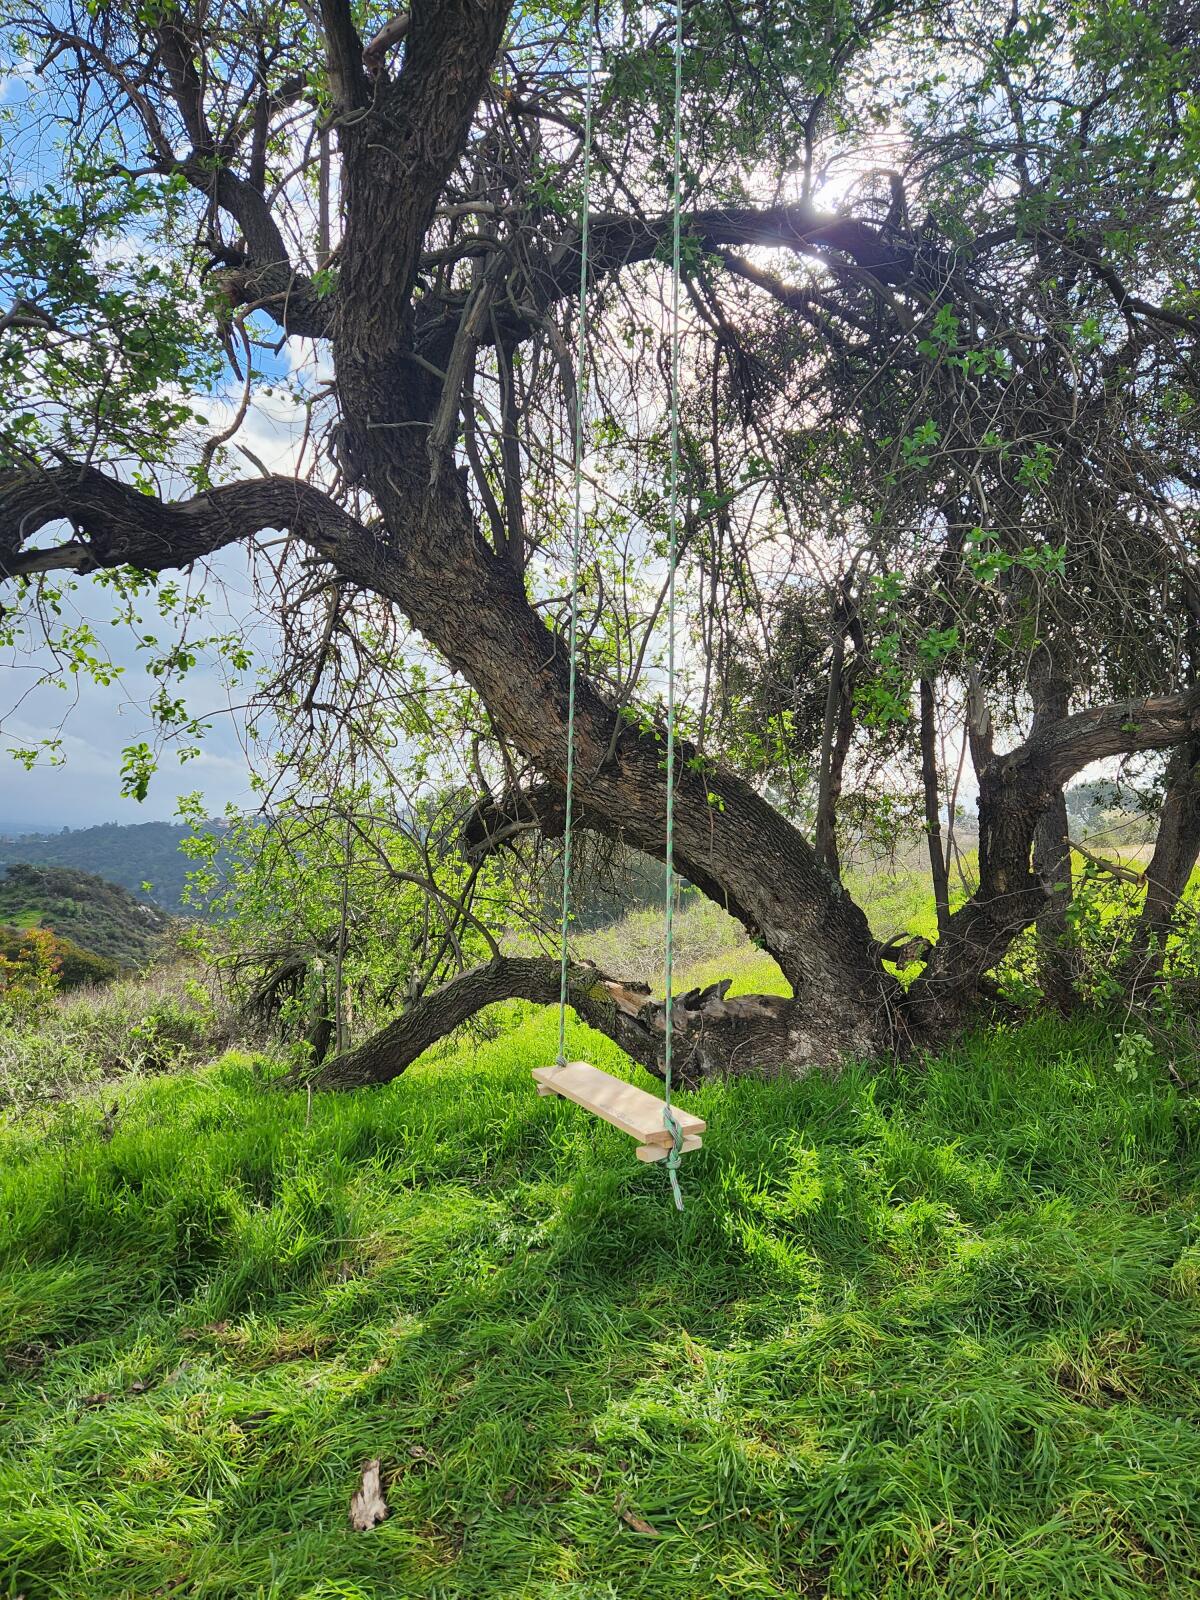 A photograph of a tree with a swing from Cherry Canyon hiking trail.